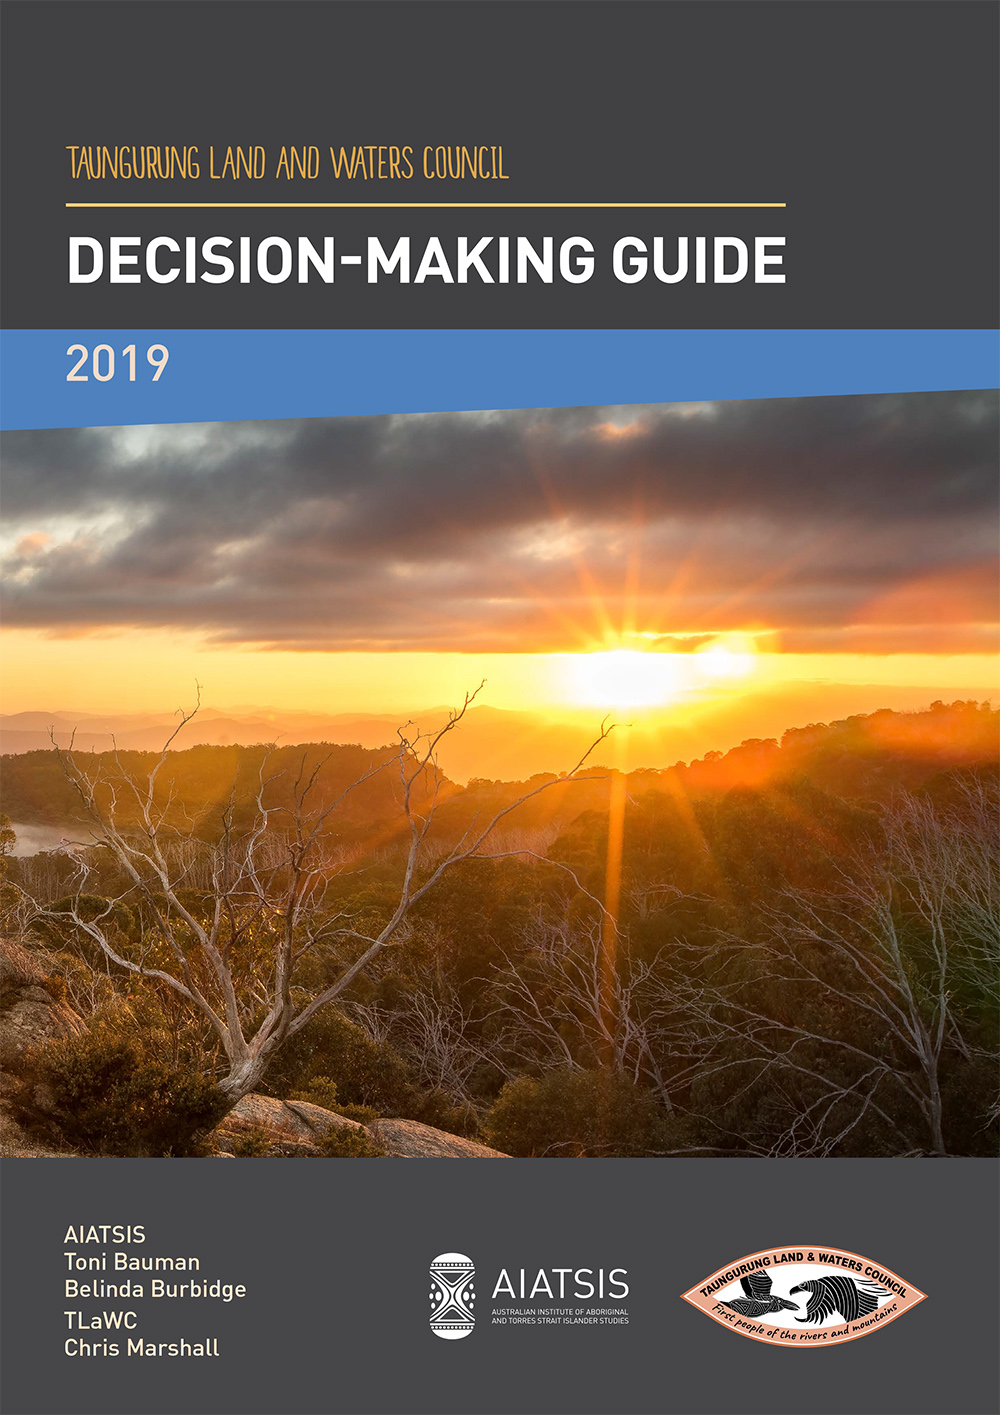 Taungurung decision-making guide cover